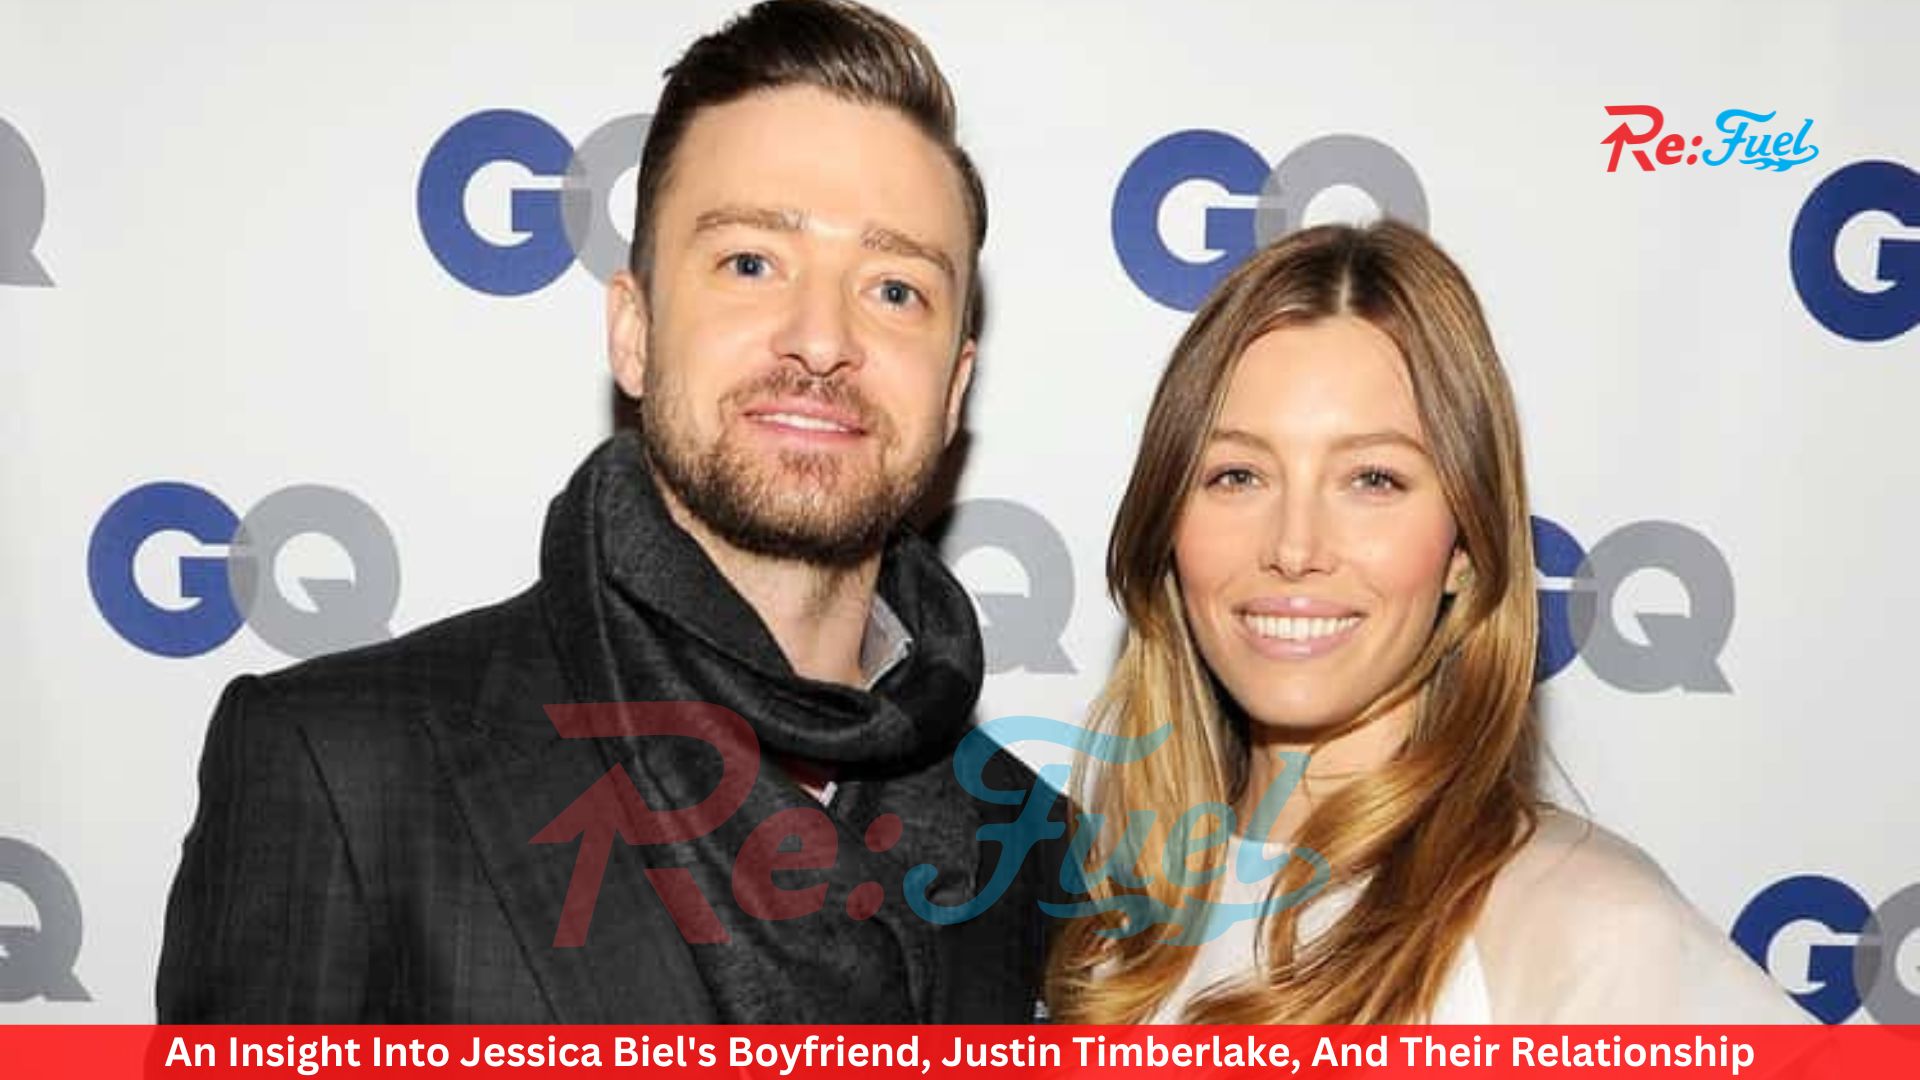 An Insight Into Jessica Biel's Boyfriend, Justin Timberlake, And Their Relationship